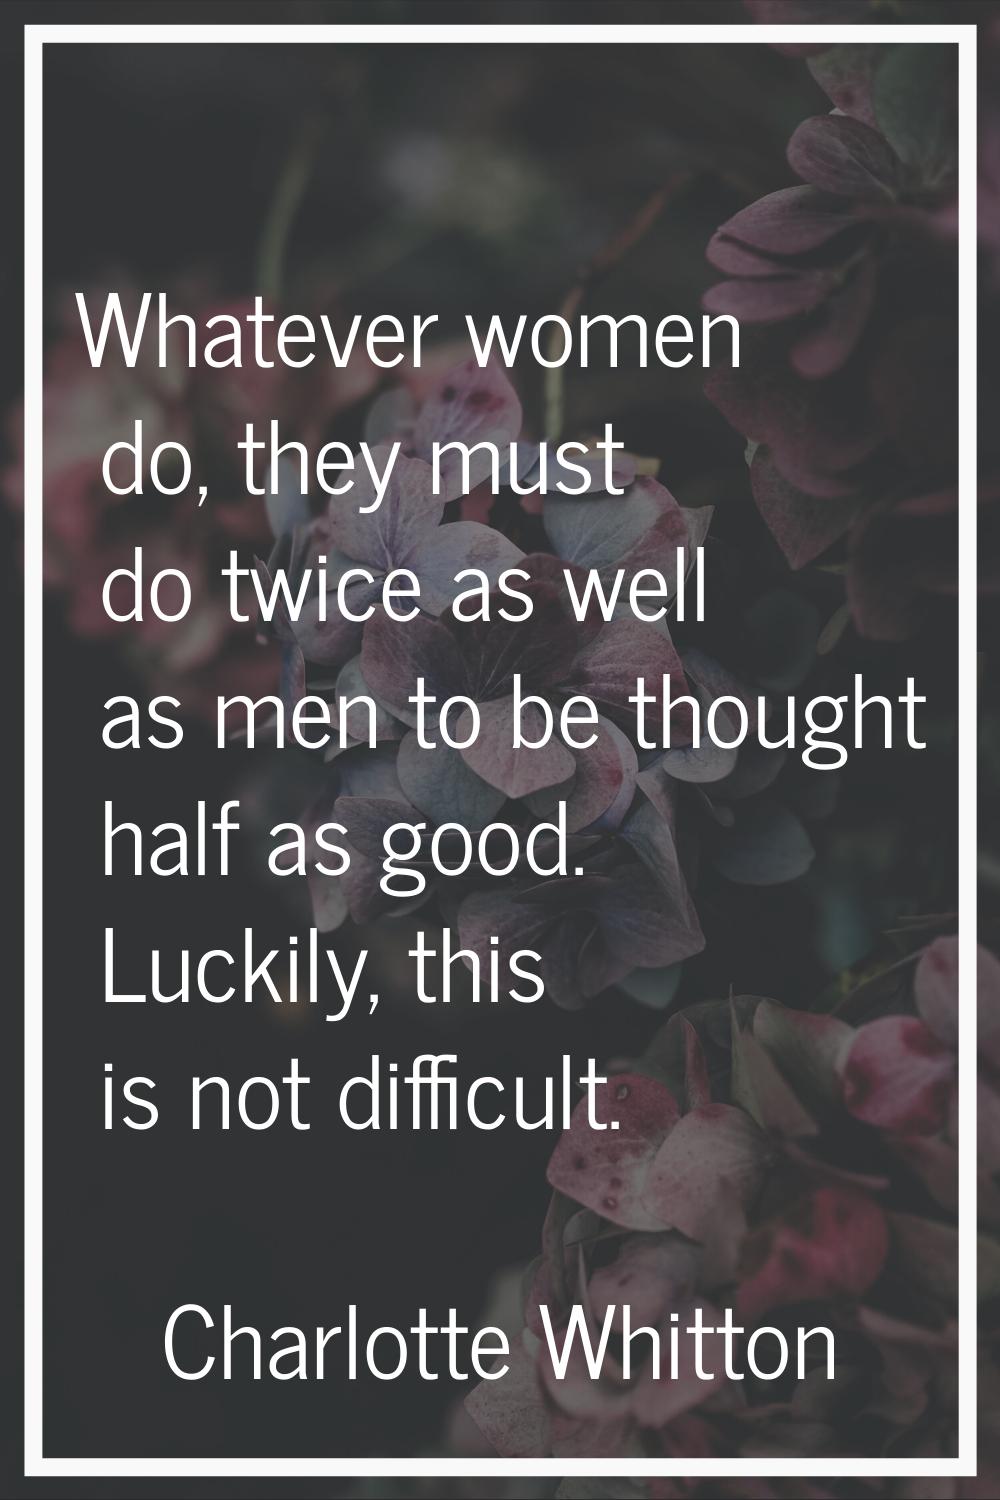 Whatever women do, they must do twice as well as men to be thought half as good. Luckily, this is n